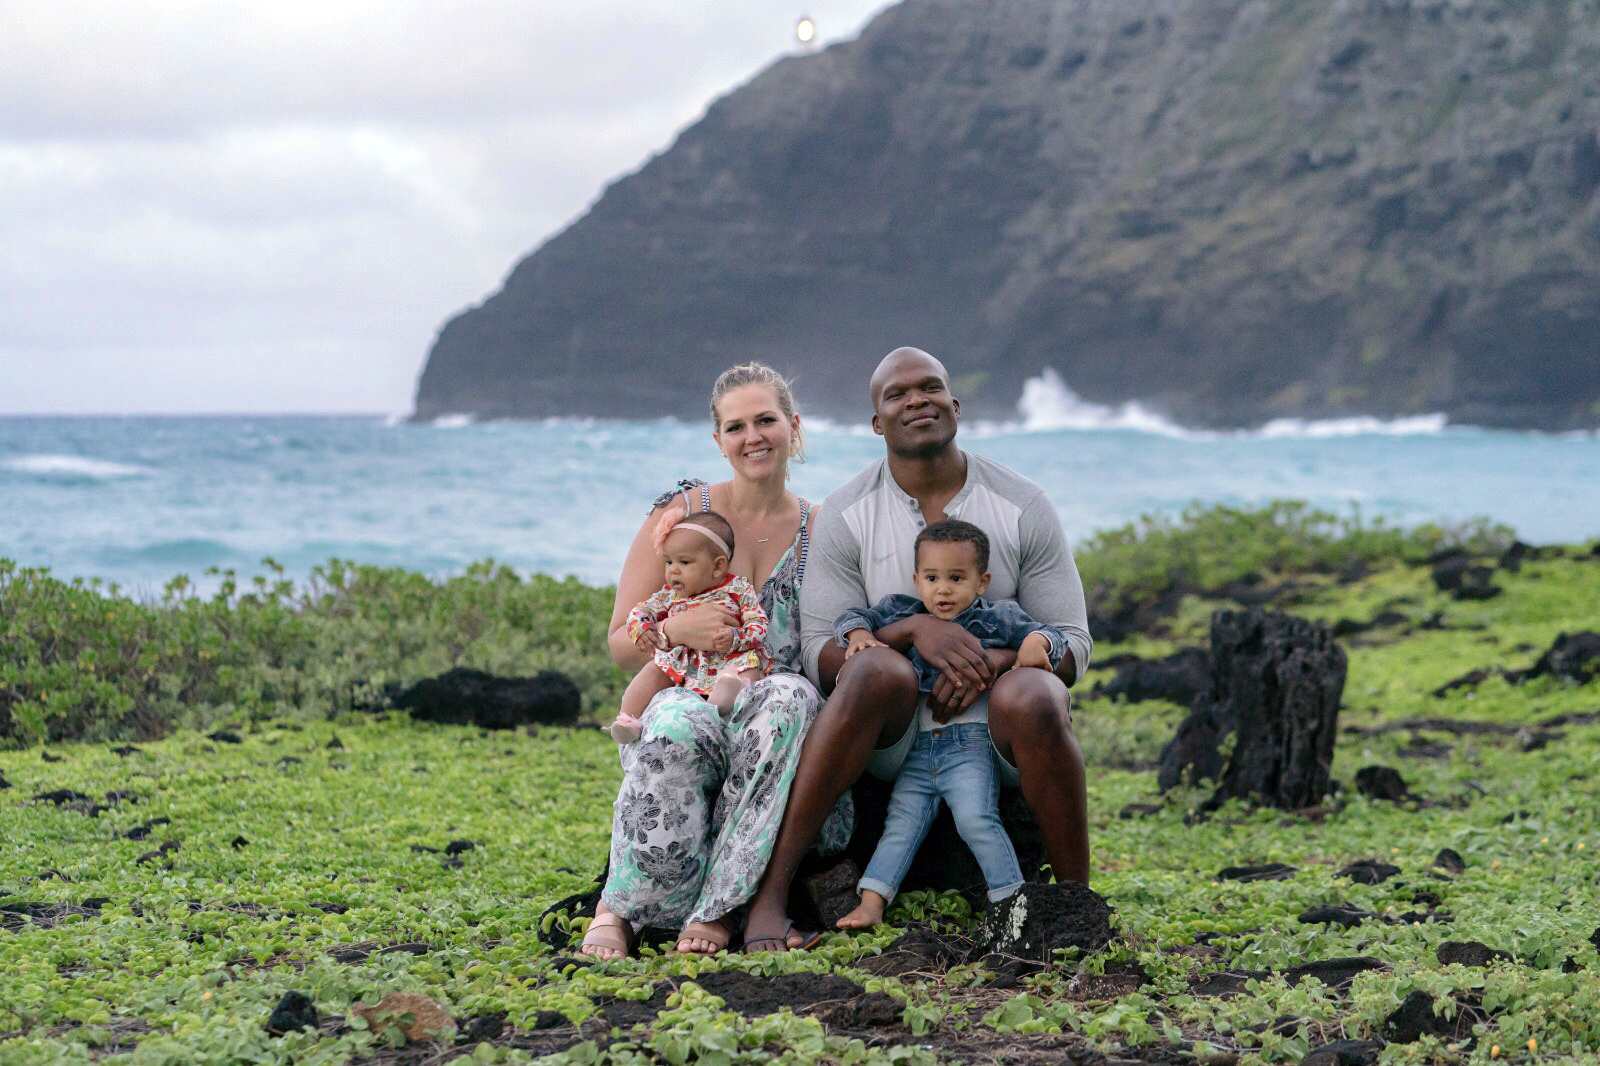 PHOTO: Lindani Myeni is pictured in Hawaii with his wife Lindsay Myeni and their two children in an undated handout photo.